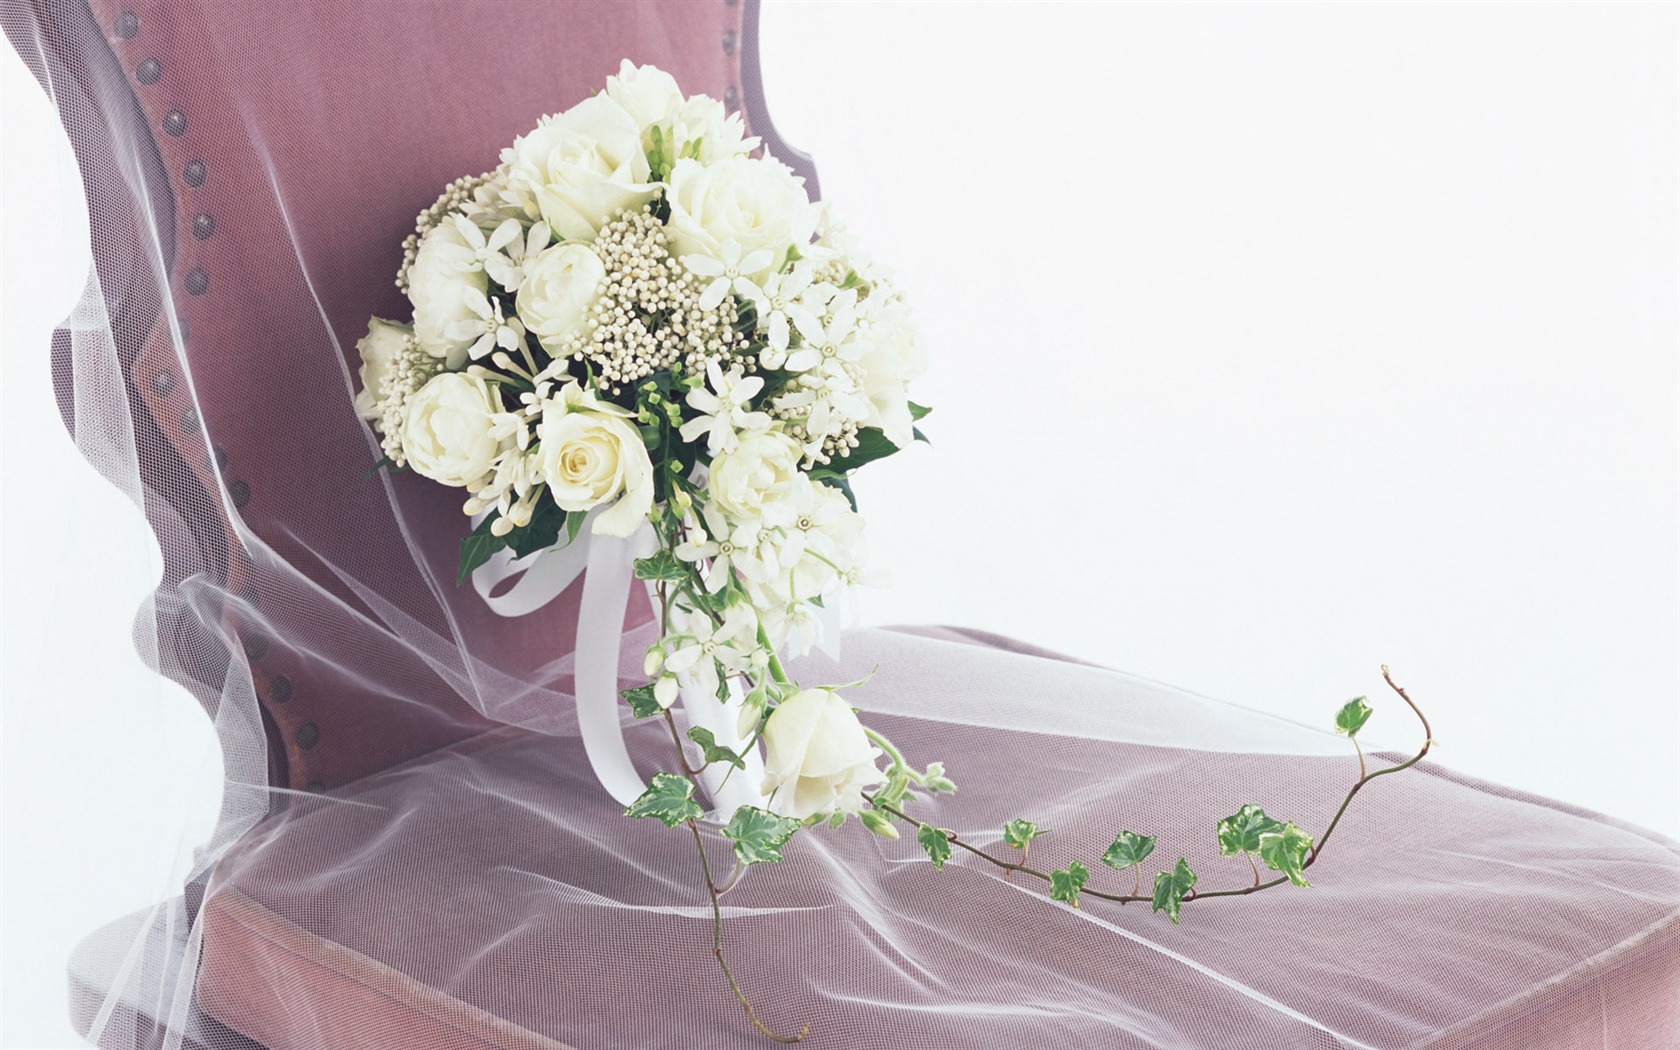 Weddings and Flowers wallpaper (1) #7 - 1680x1050